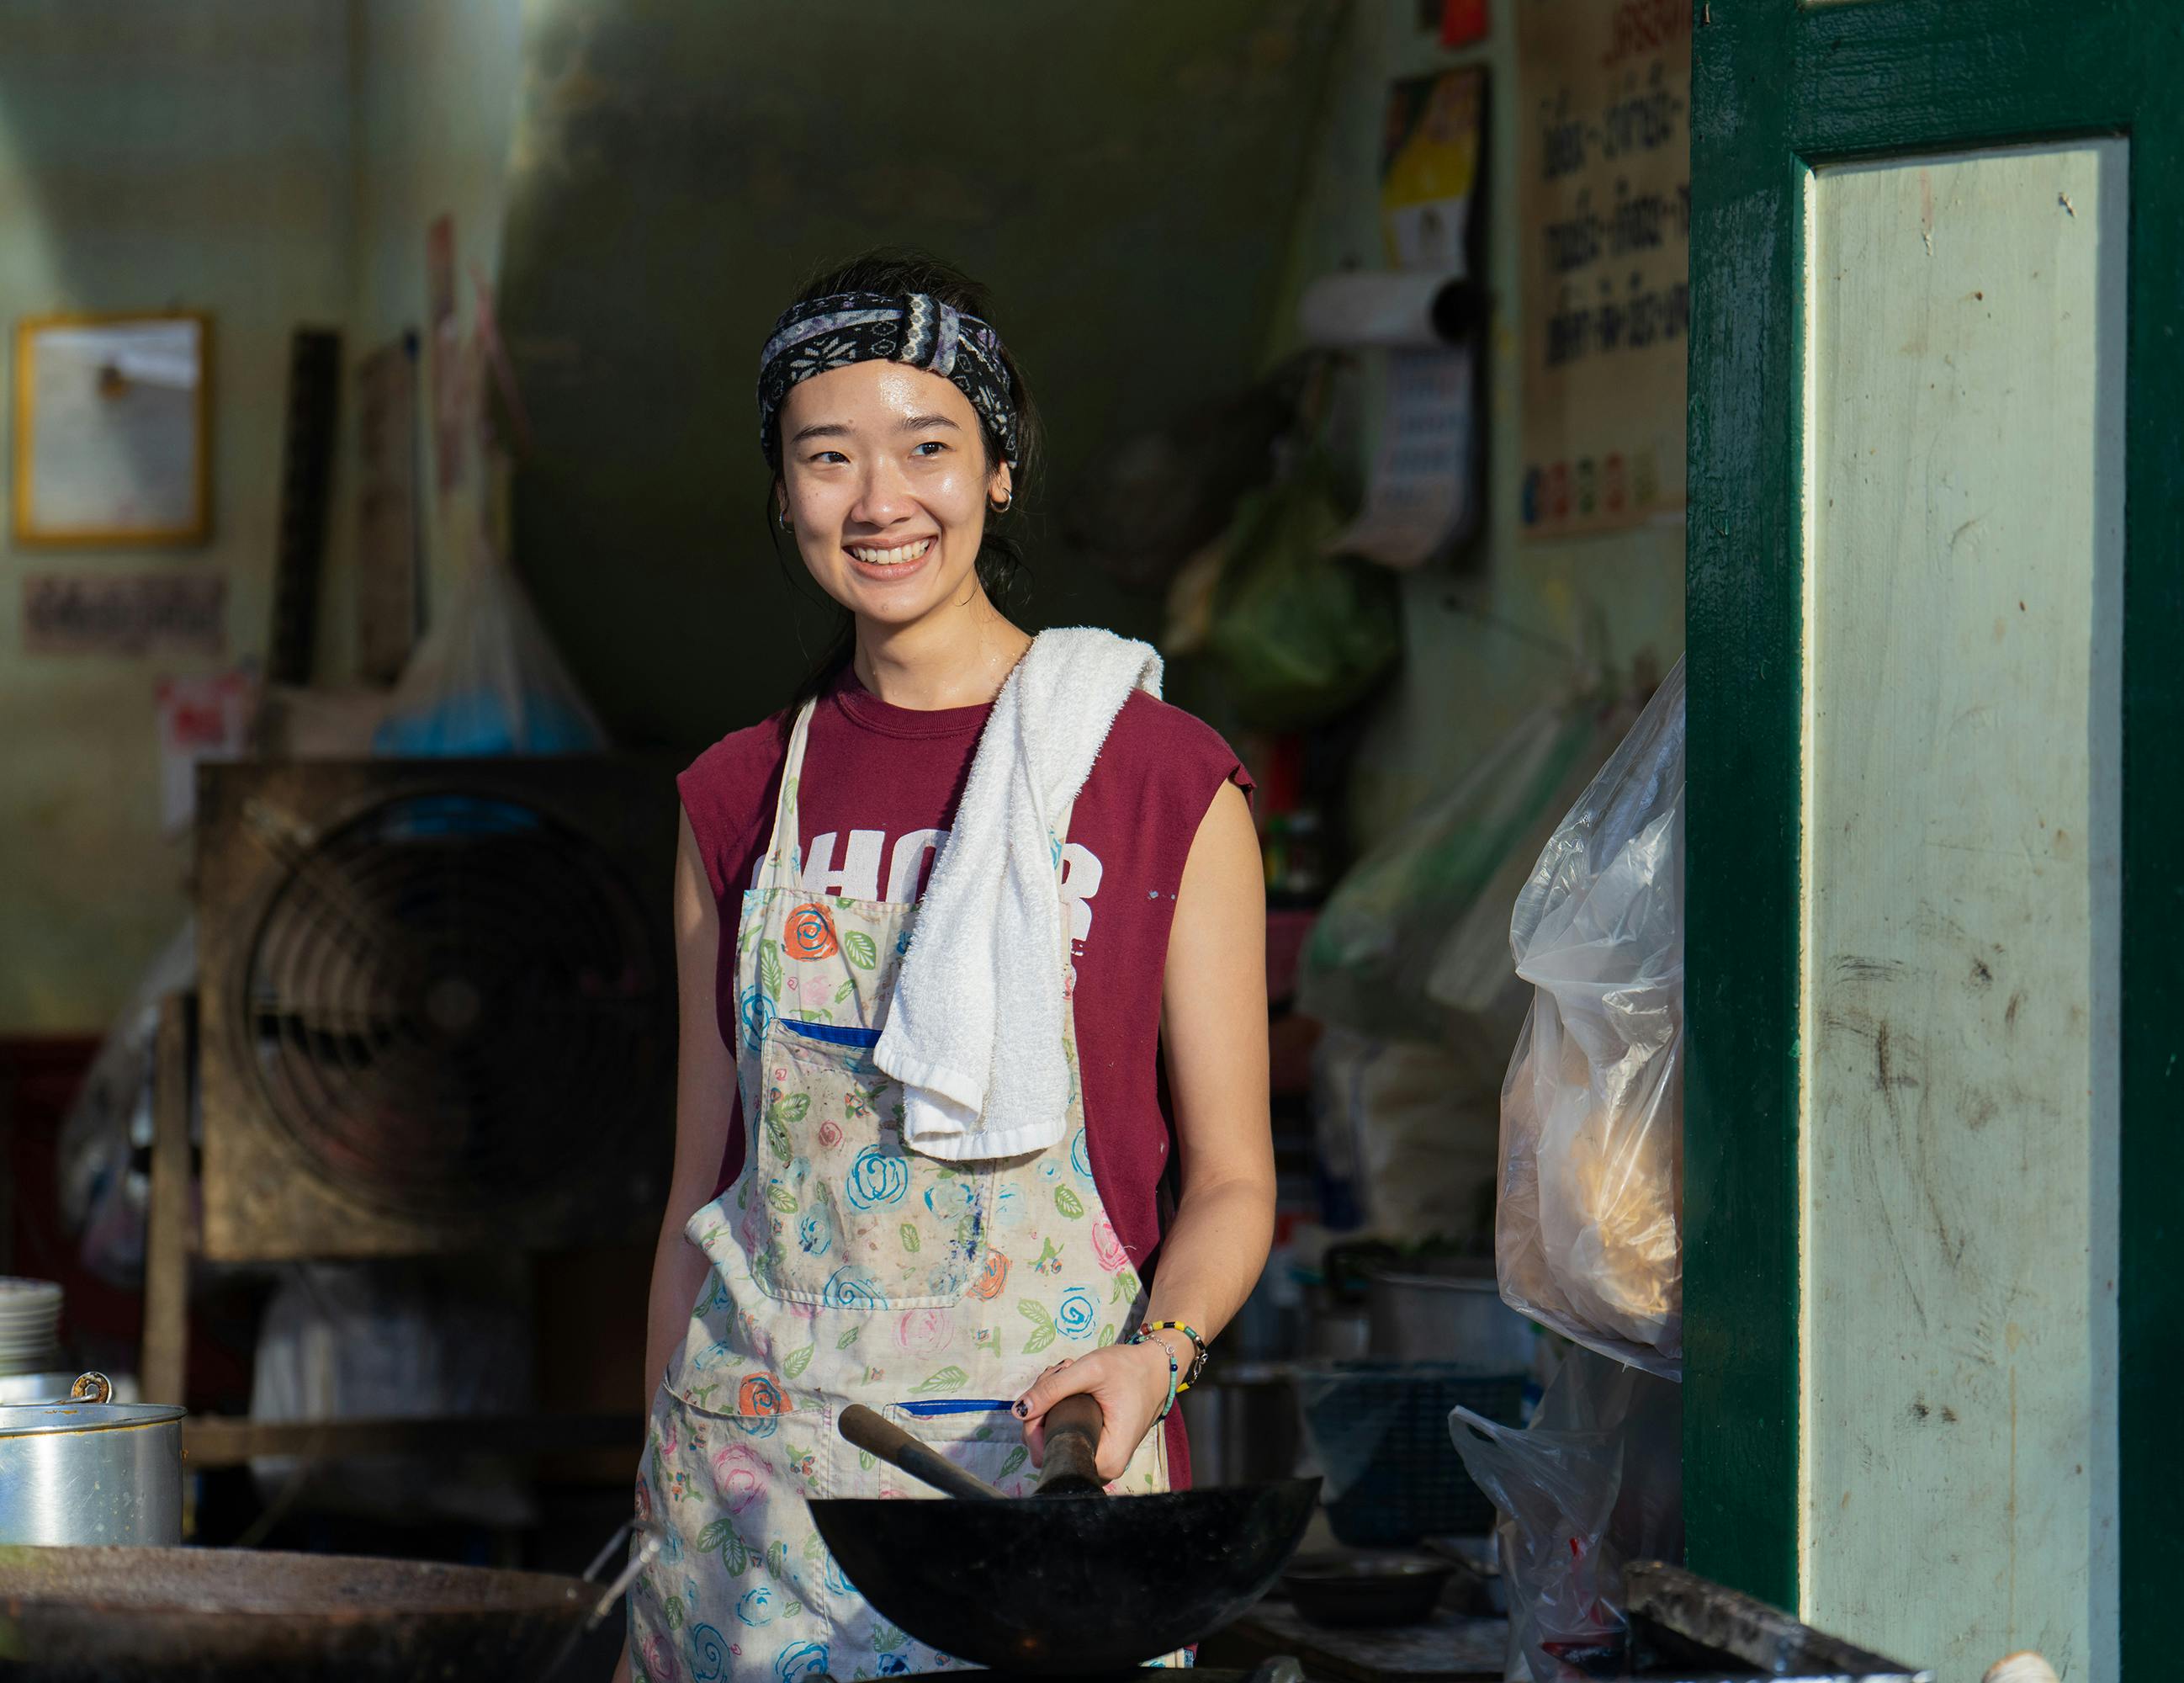 Aoy (Chutimon “Aokbab” Chuengcharoensukying) wears a red shirt and colorful apron and holds a wok, smiling at something offcamera